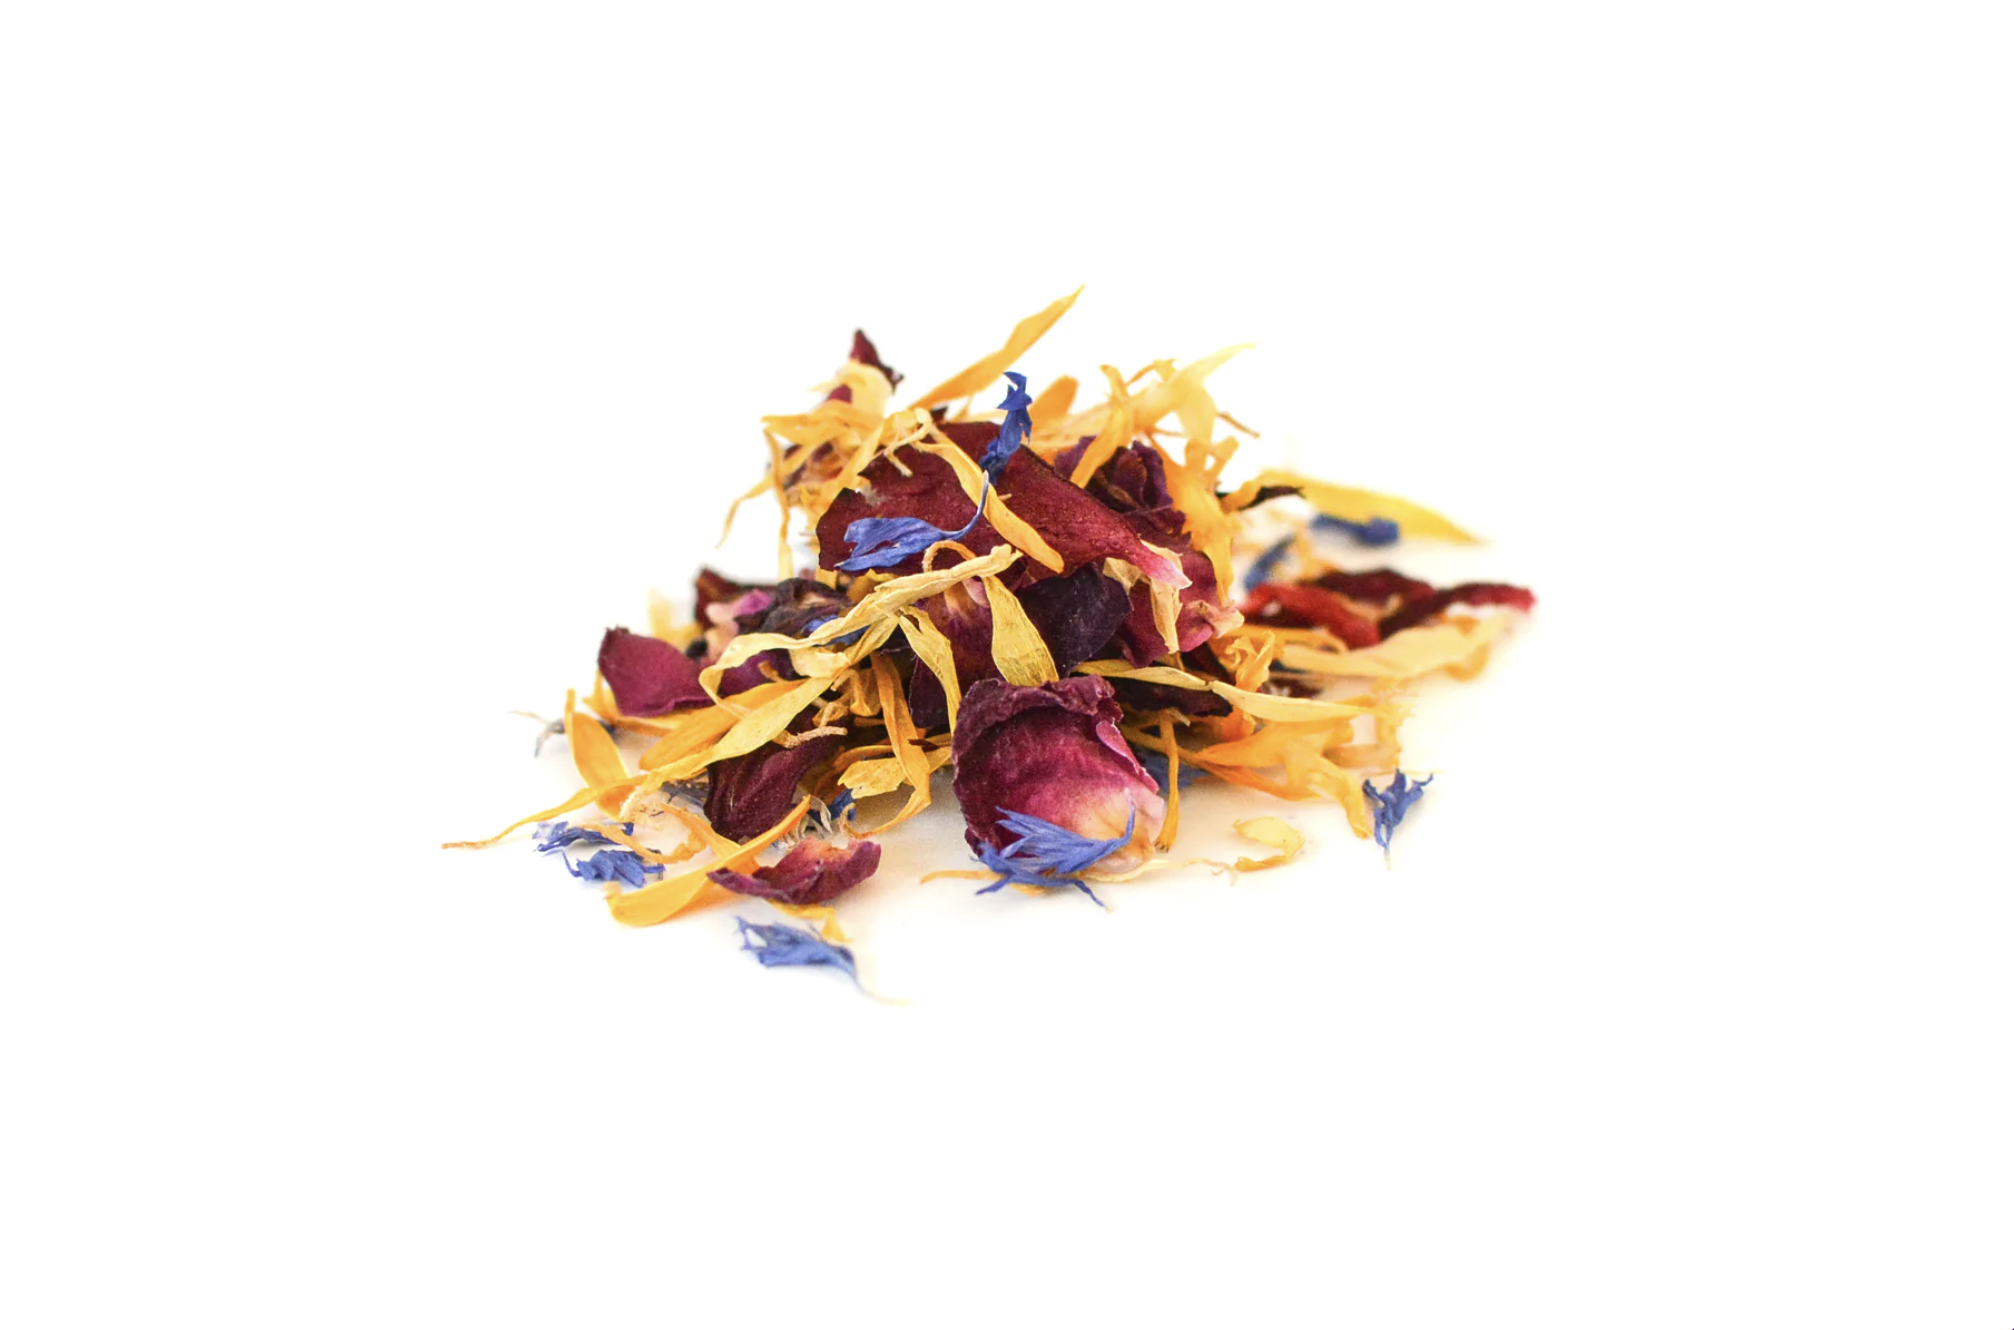 Dried Edible Confetti by Petite Ingredient - Miss Biscuit